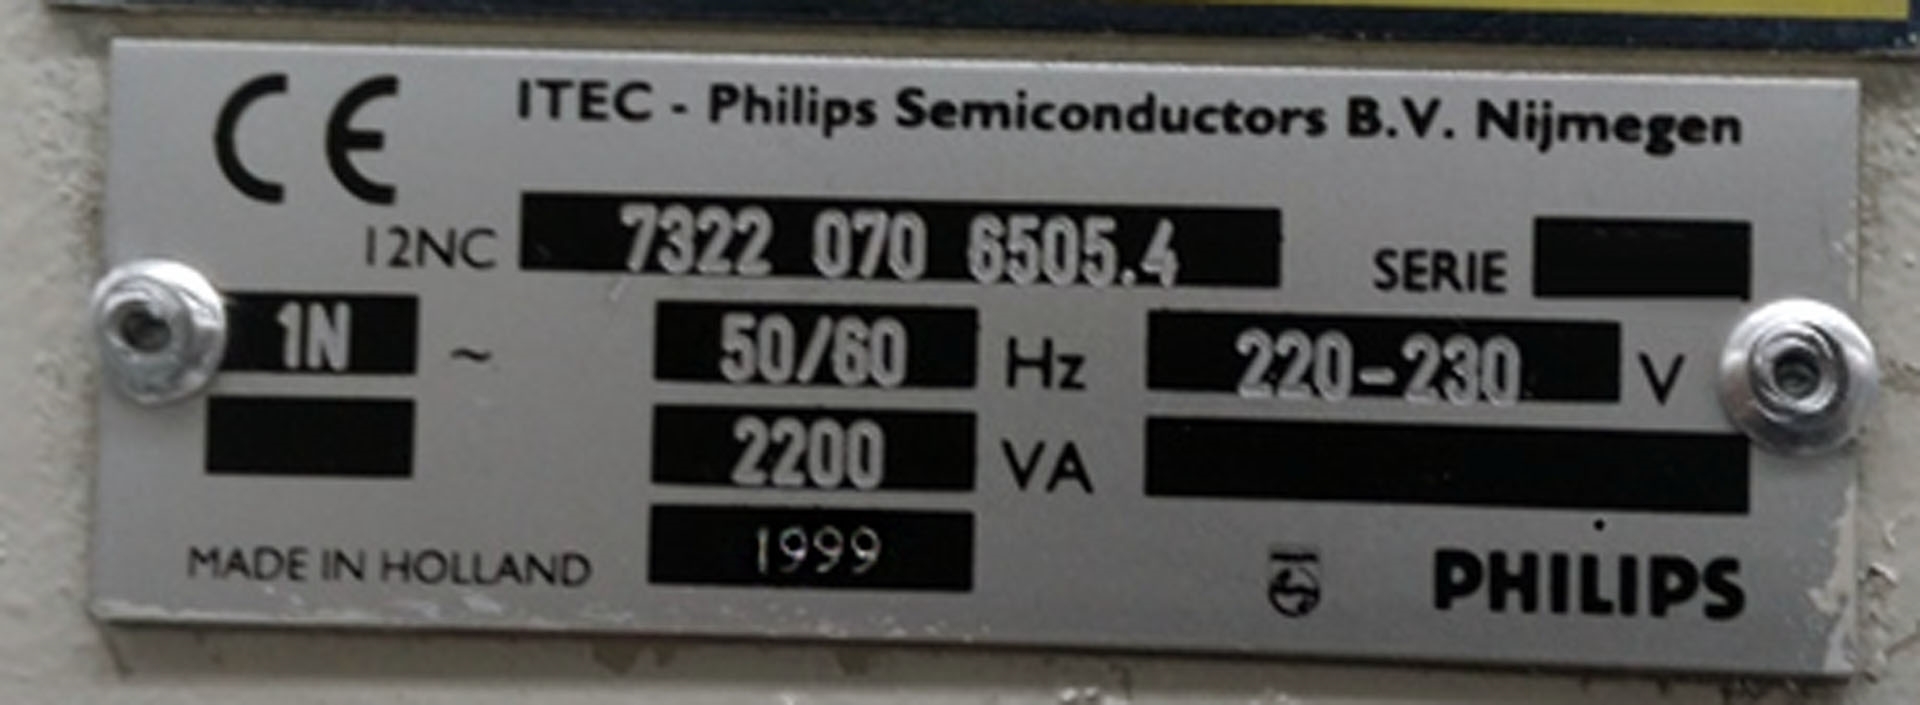 Photo Used PHILIPS / ITEC 7322 070 6505.4 For Sale